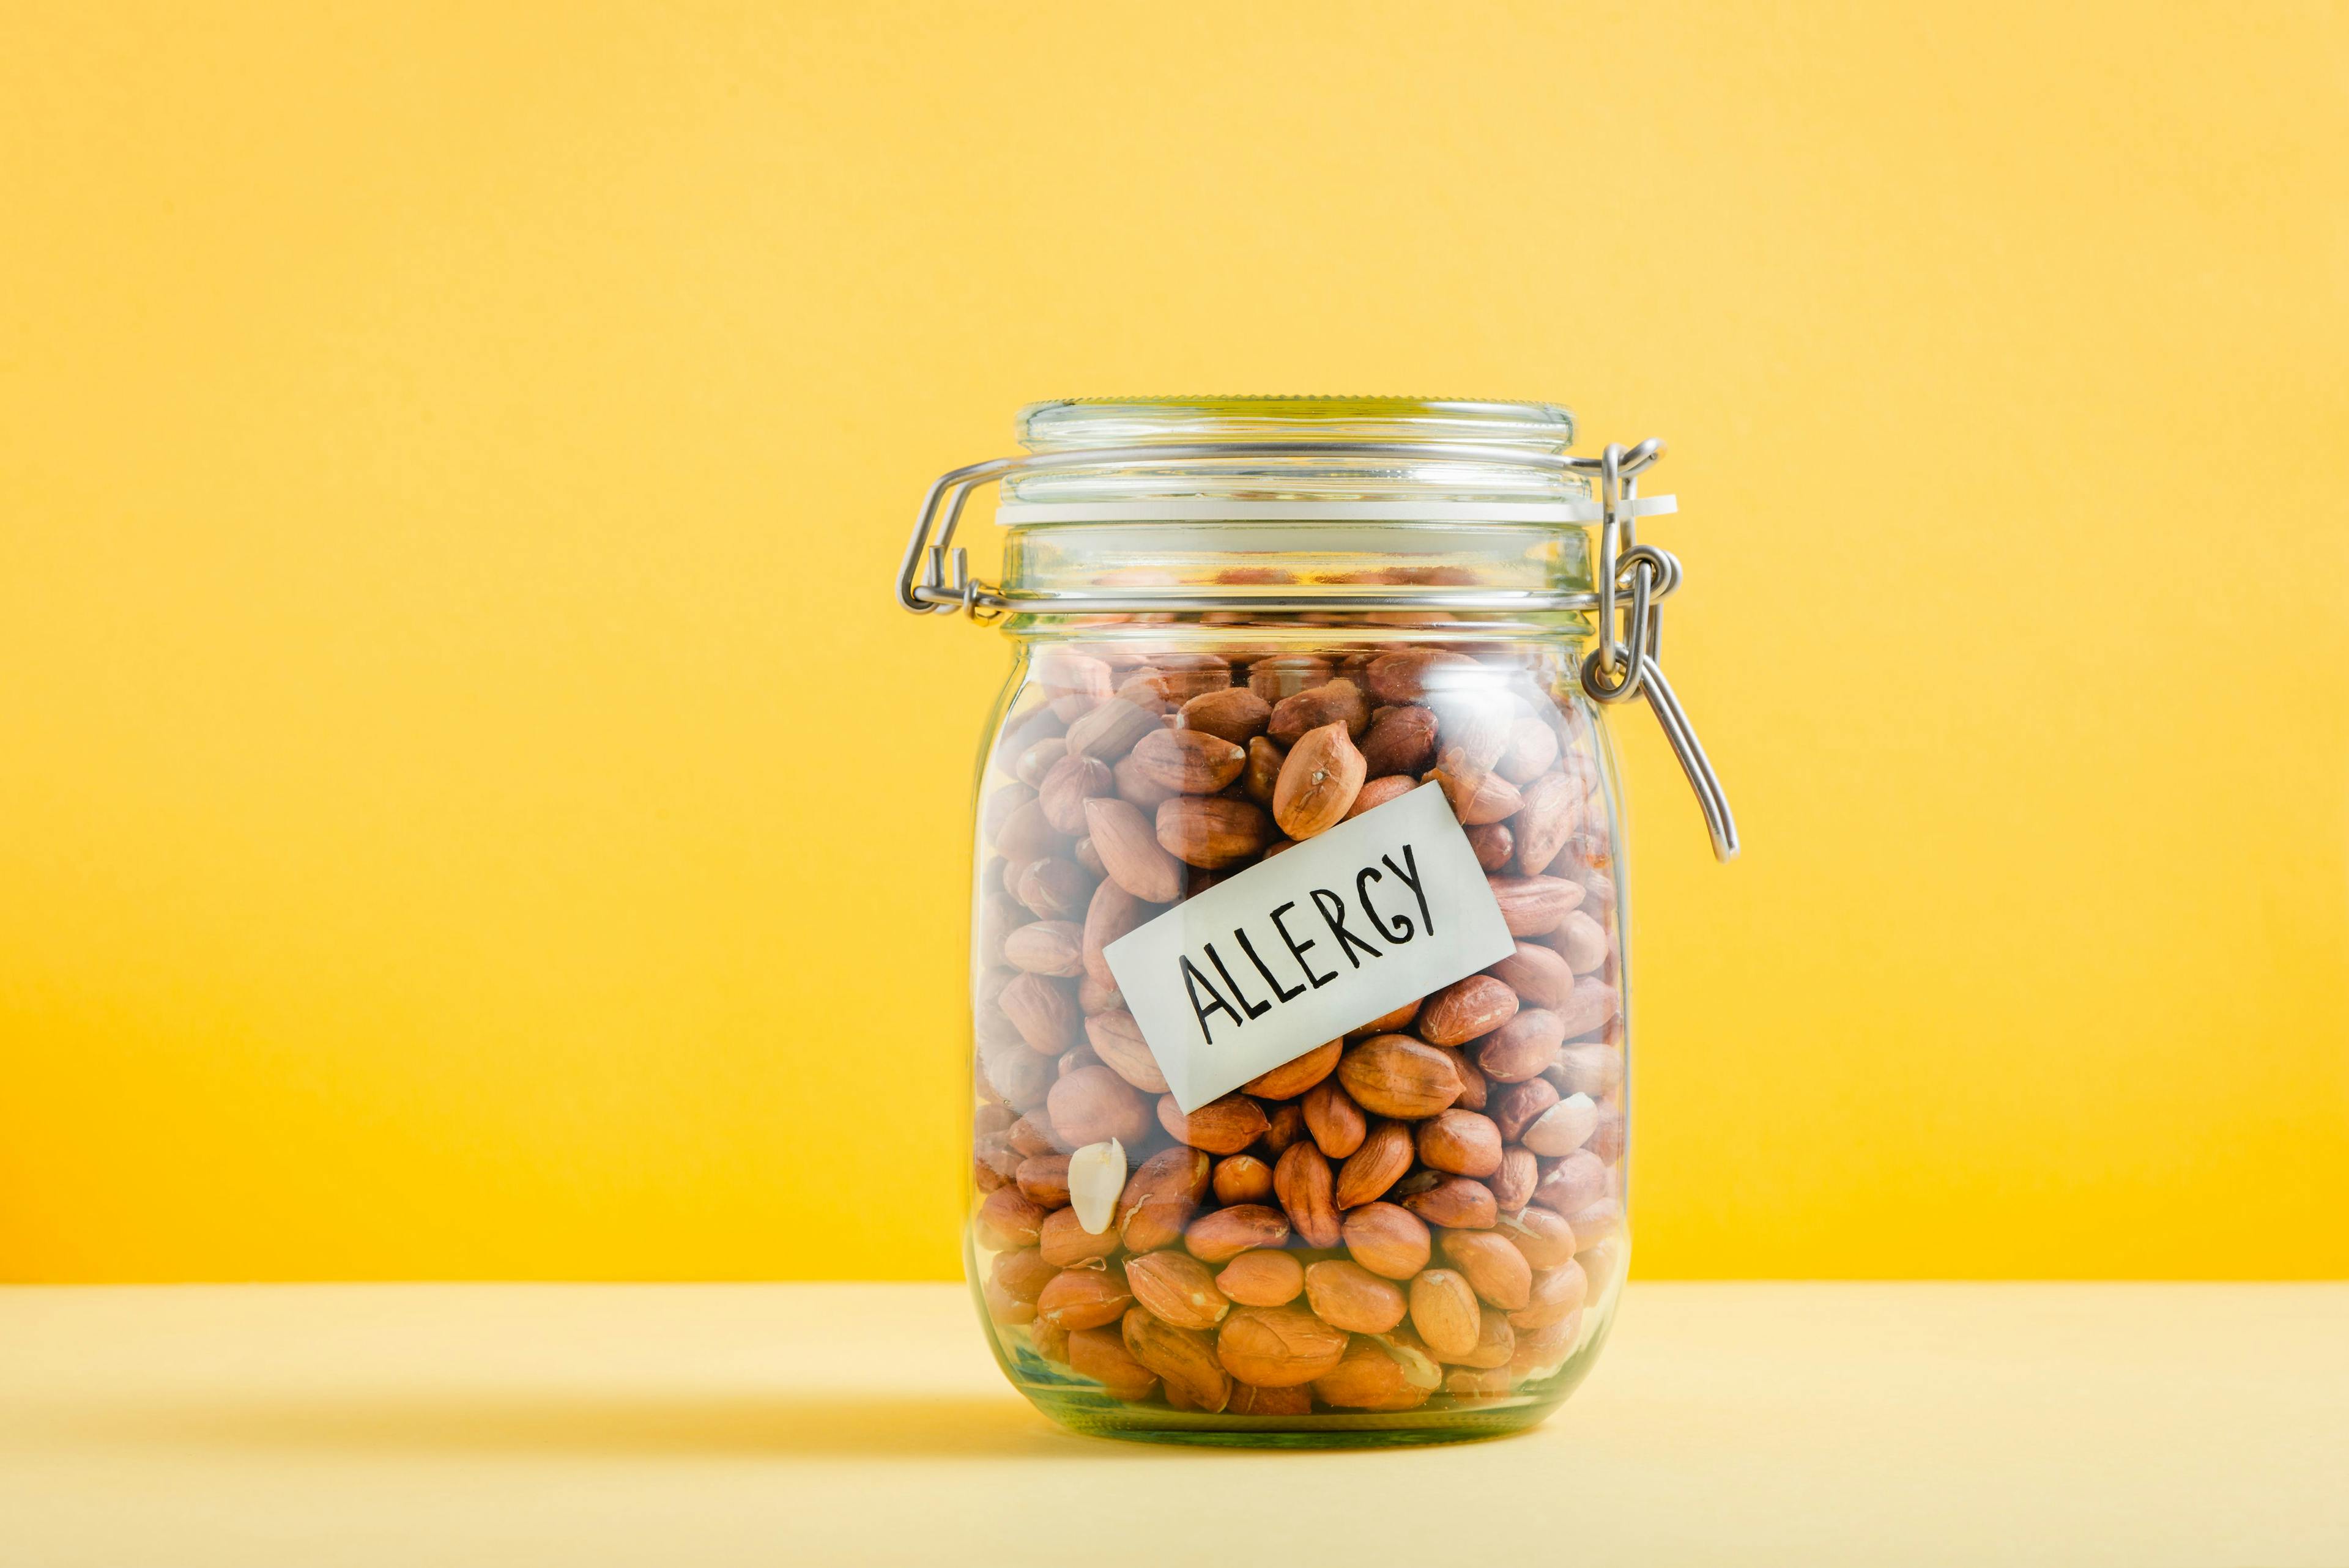 Essential advice to prevent food allergies